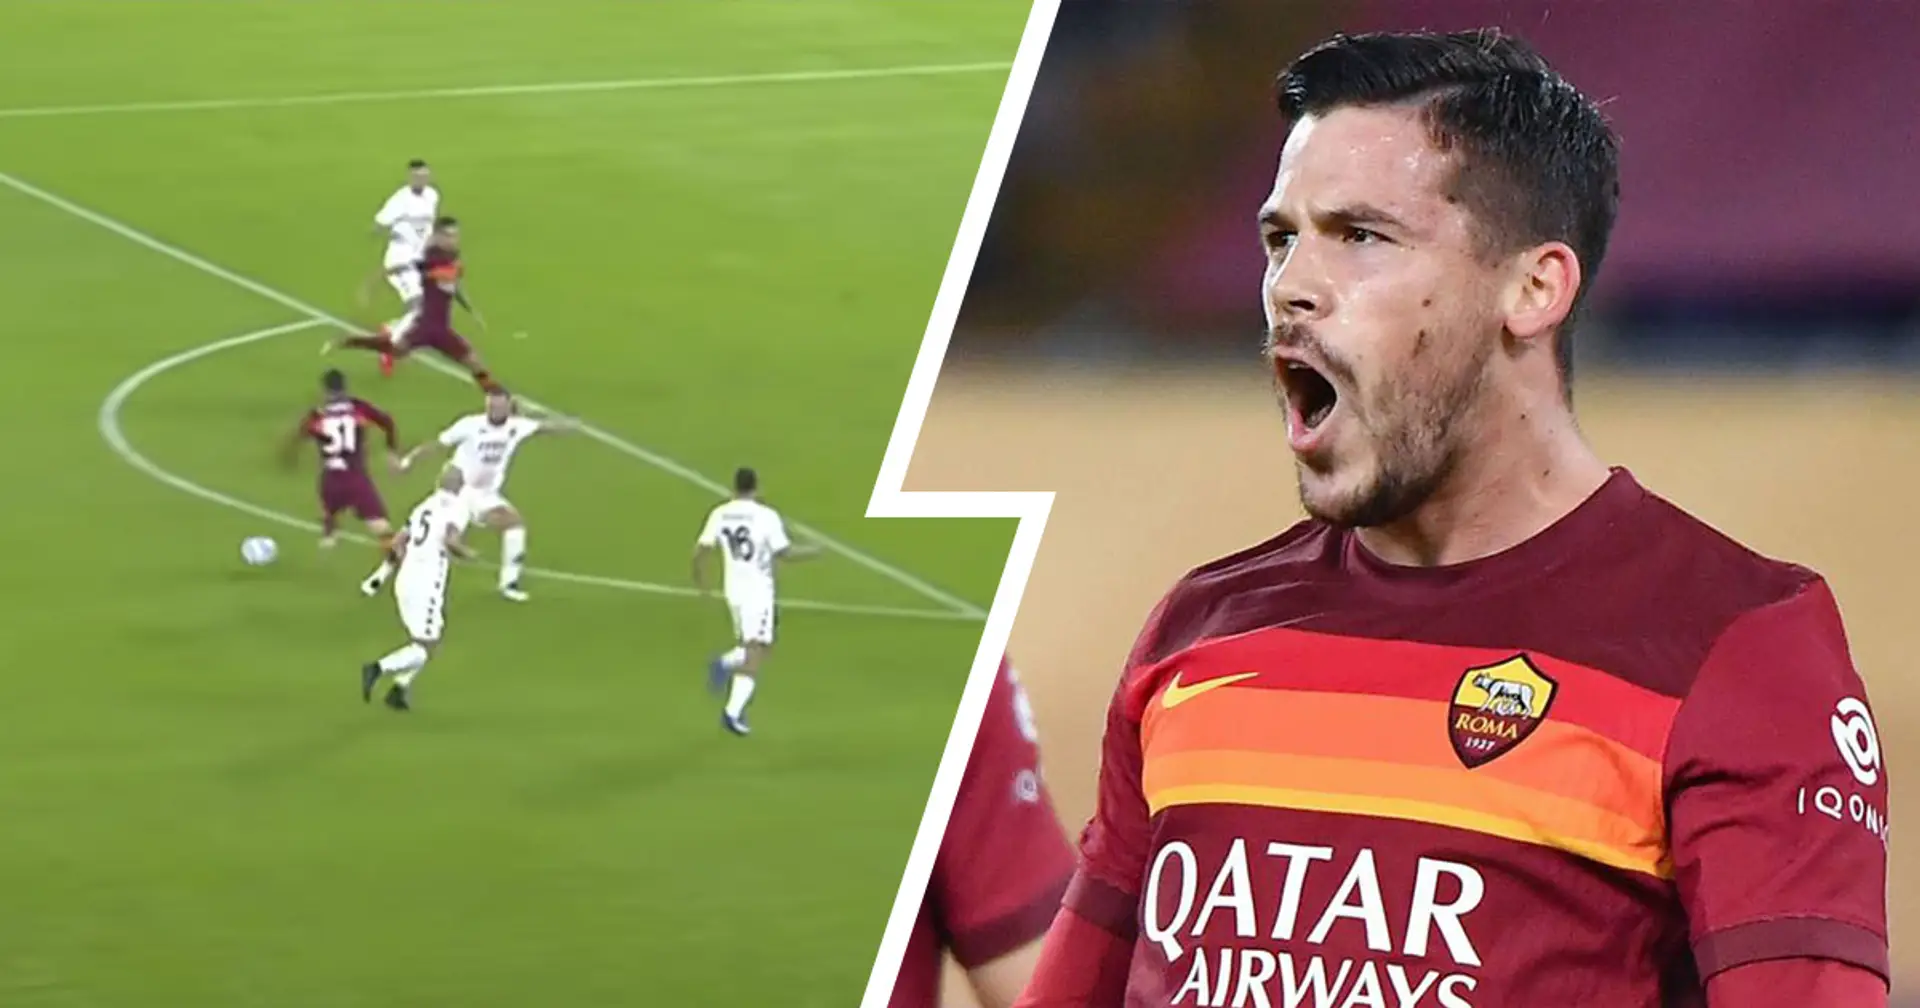 Carles Perez's mindblowing Roma goal goes viral – it's almost as wonderful as Colosseum (video)